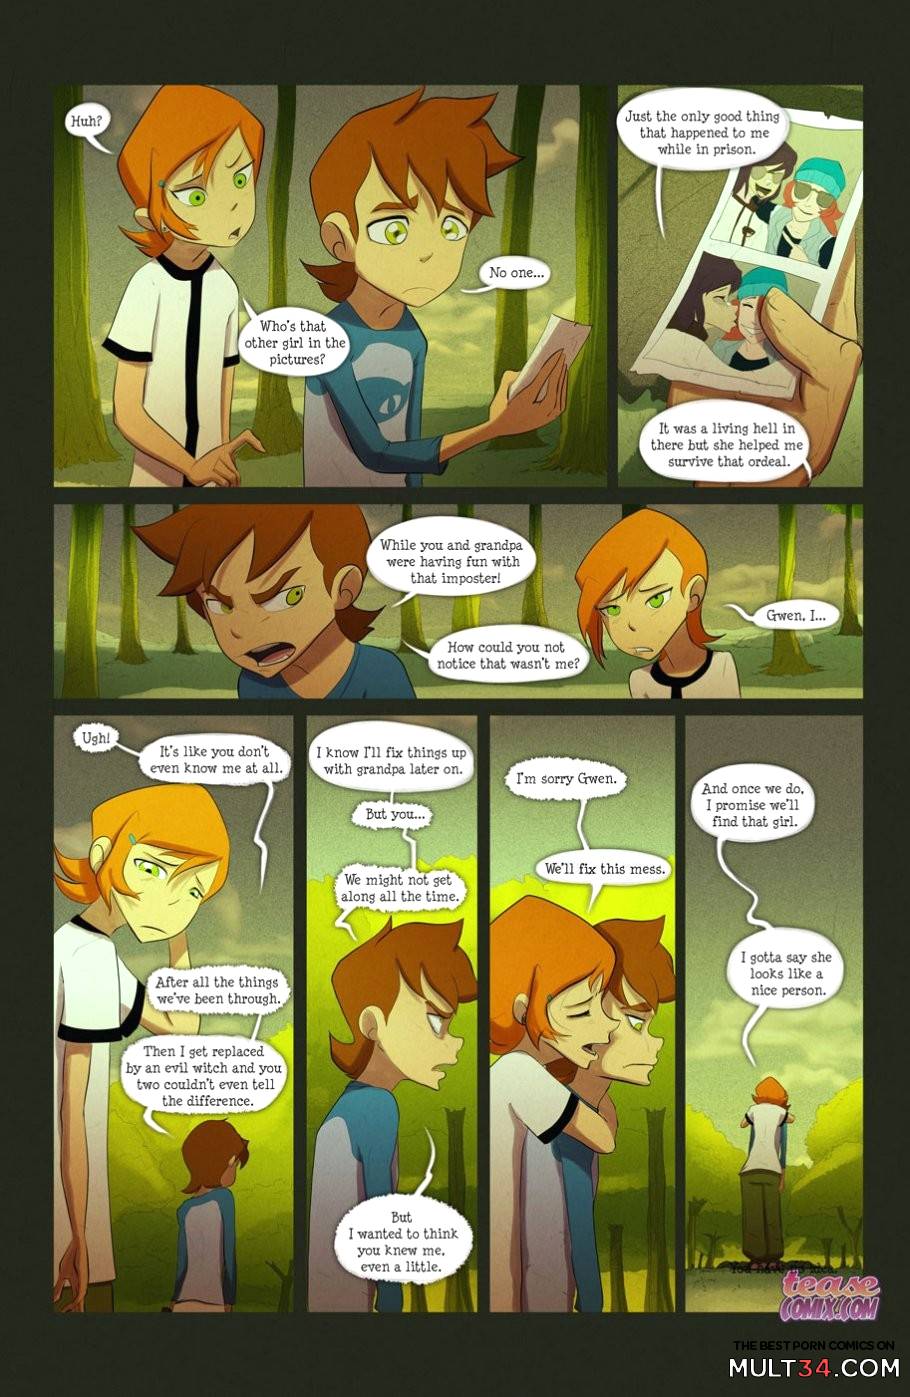 Ben 10 Strapon Porn - The witch with no name (Ben 10) porn comic - the best cartoon porn comics,  Rule 34 | MULT34